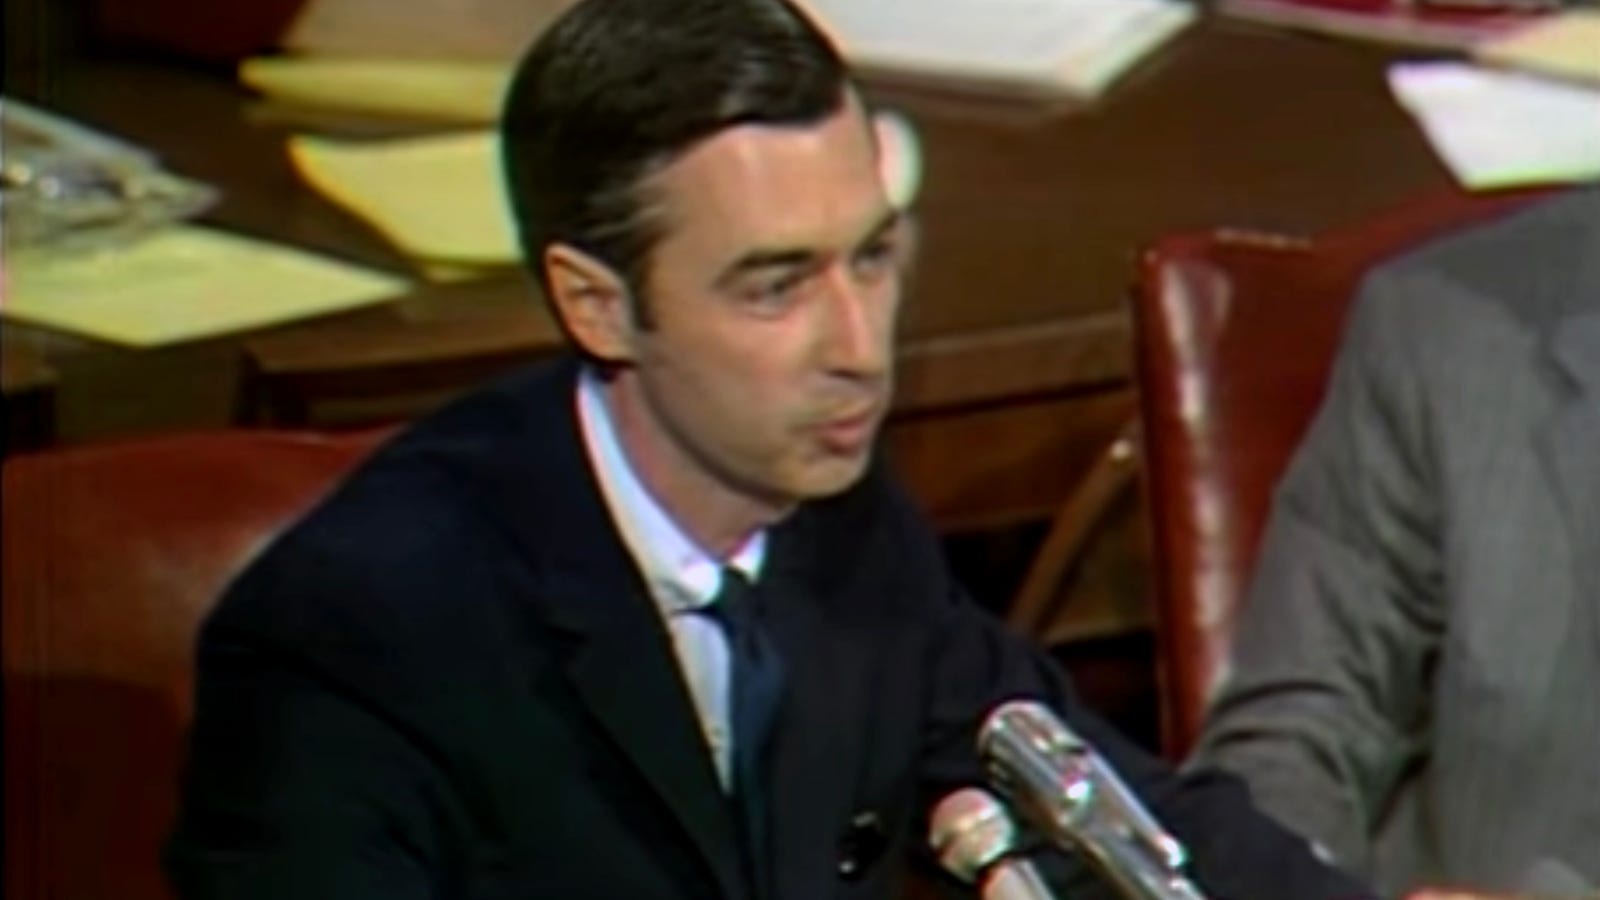 Mr Rogers testifying before congress